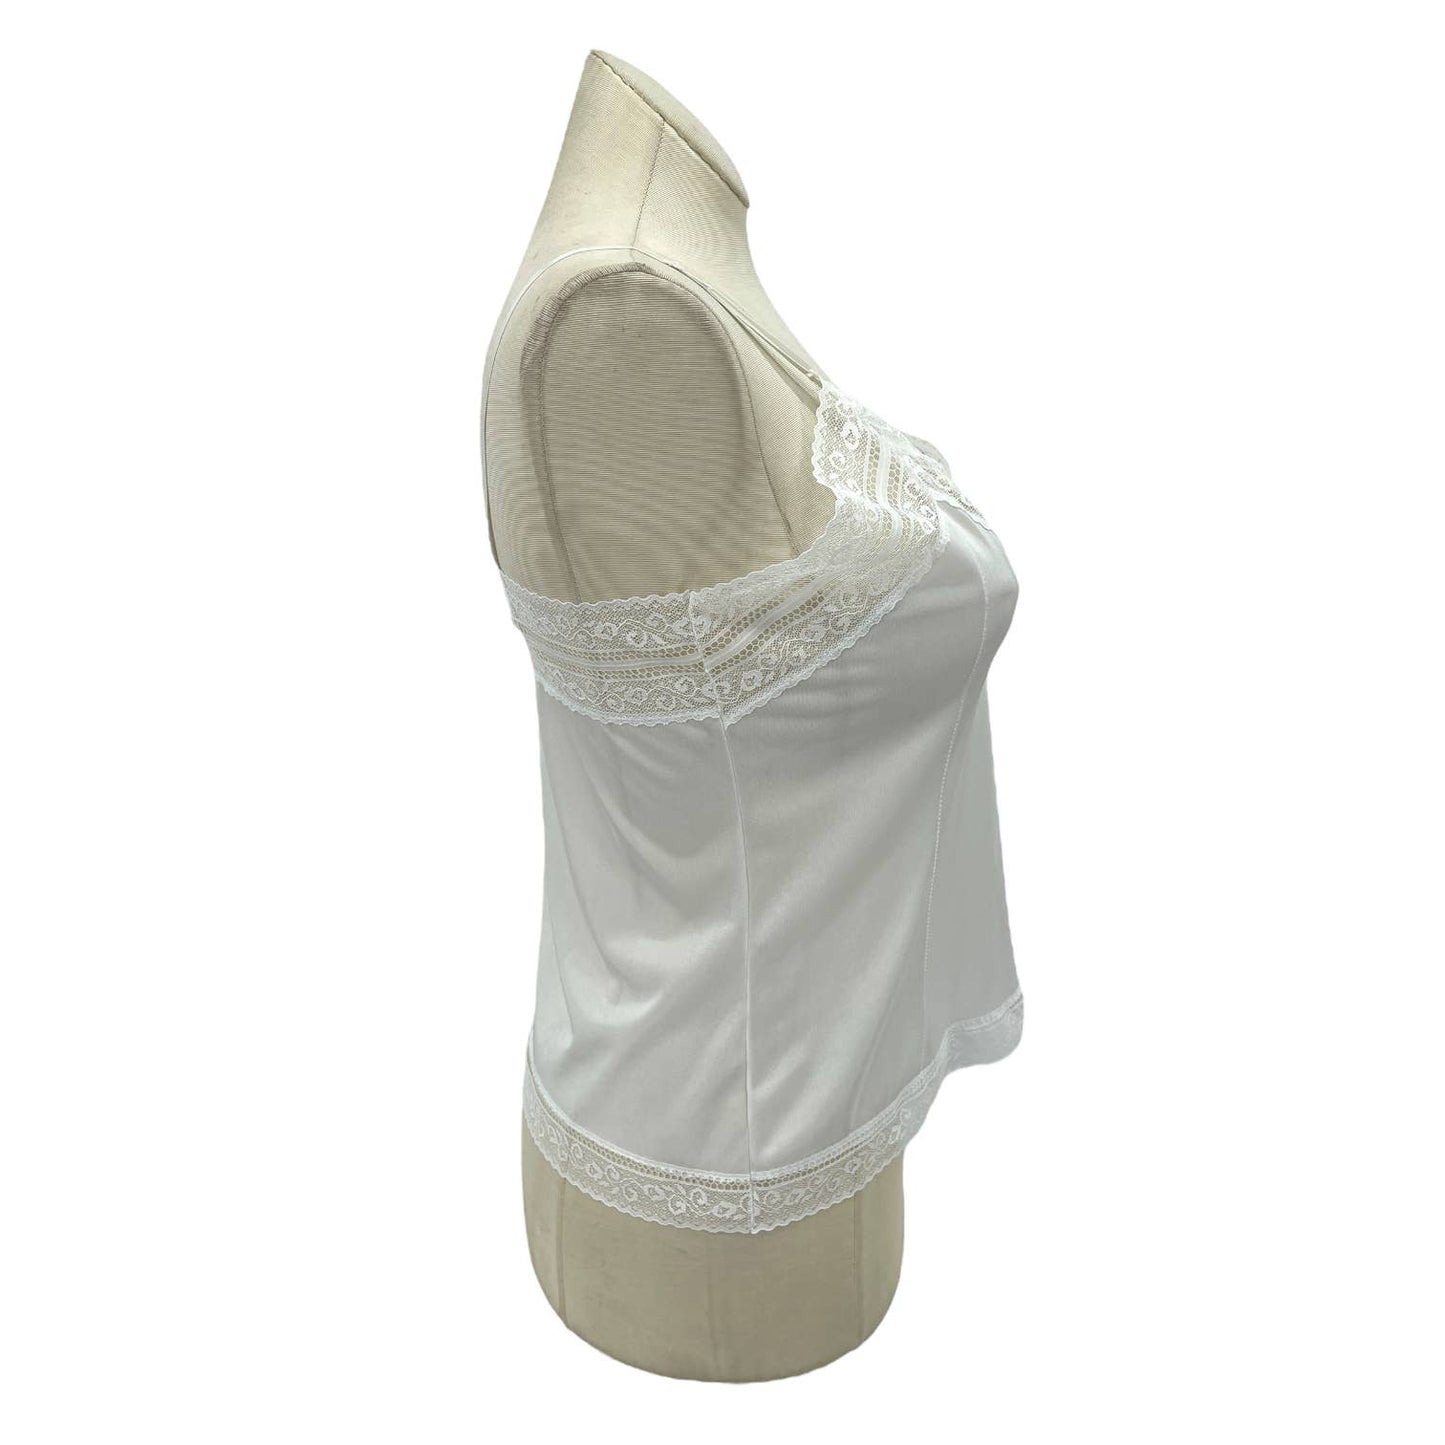 Vintage 80s White Satin Camisole Sleeveless Top Floral Romantic by Bari Size 1X